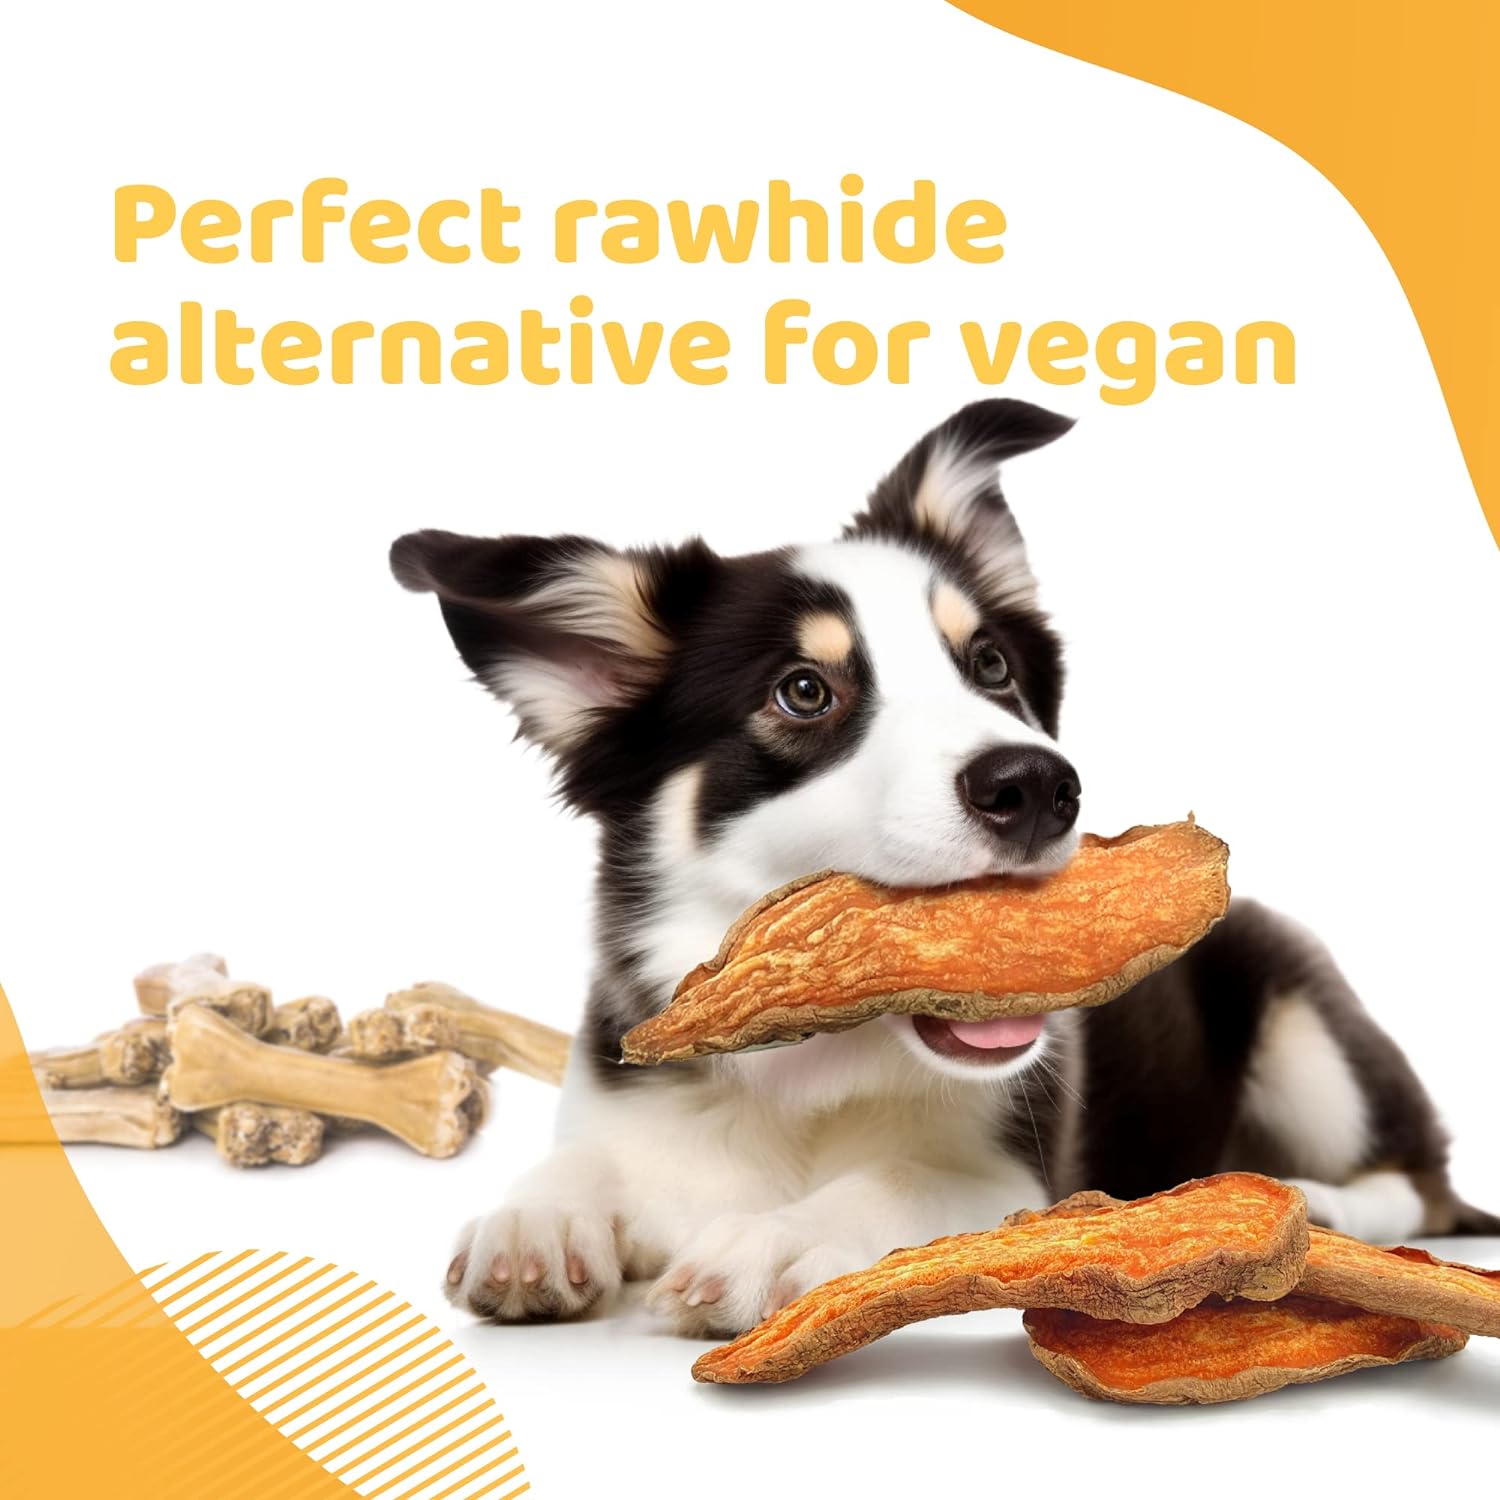 iPaw Dog Sweet Potato Chews Made in USA, Single Ingredient Dog Treats for Vegetarian, All Natural Human Grade Puppy Chew, Rawhide Alternative, Hypoallergenic, Easy to Digest : Pet Supplies